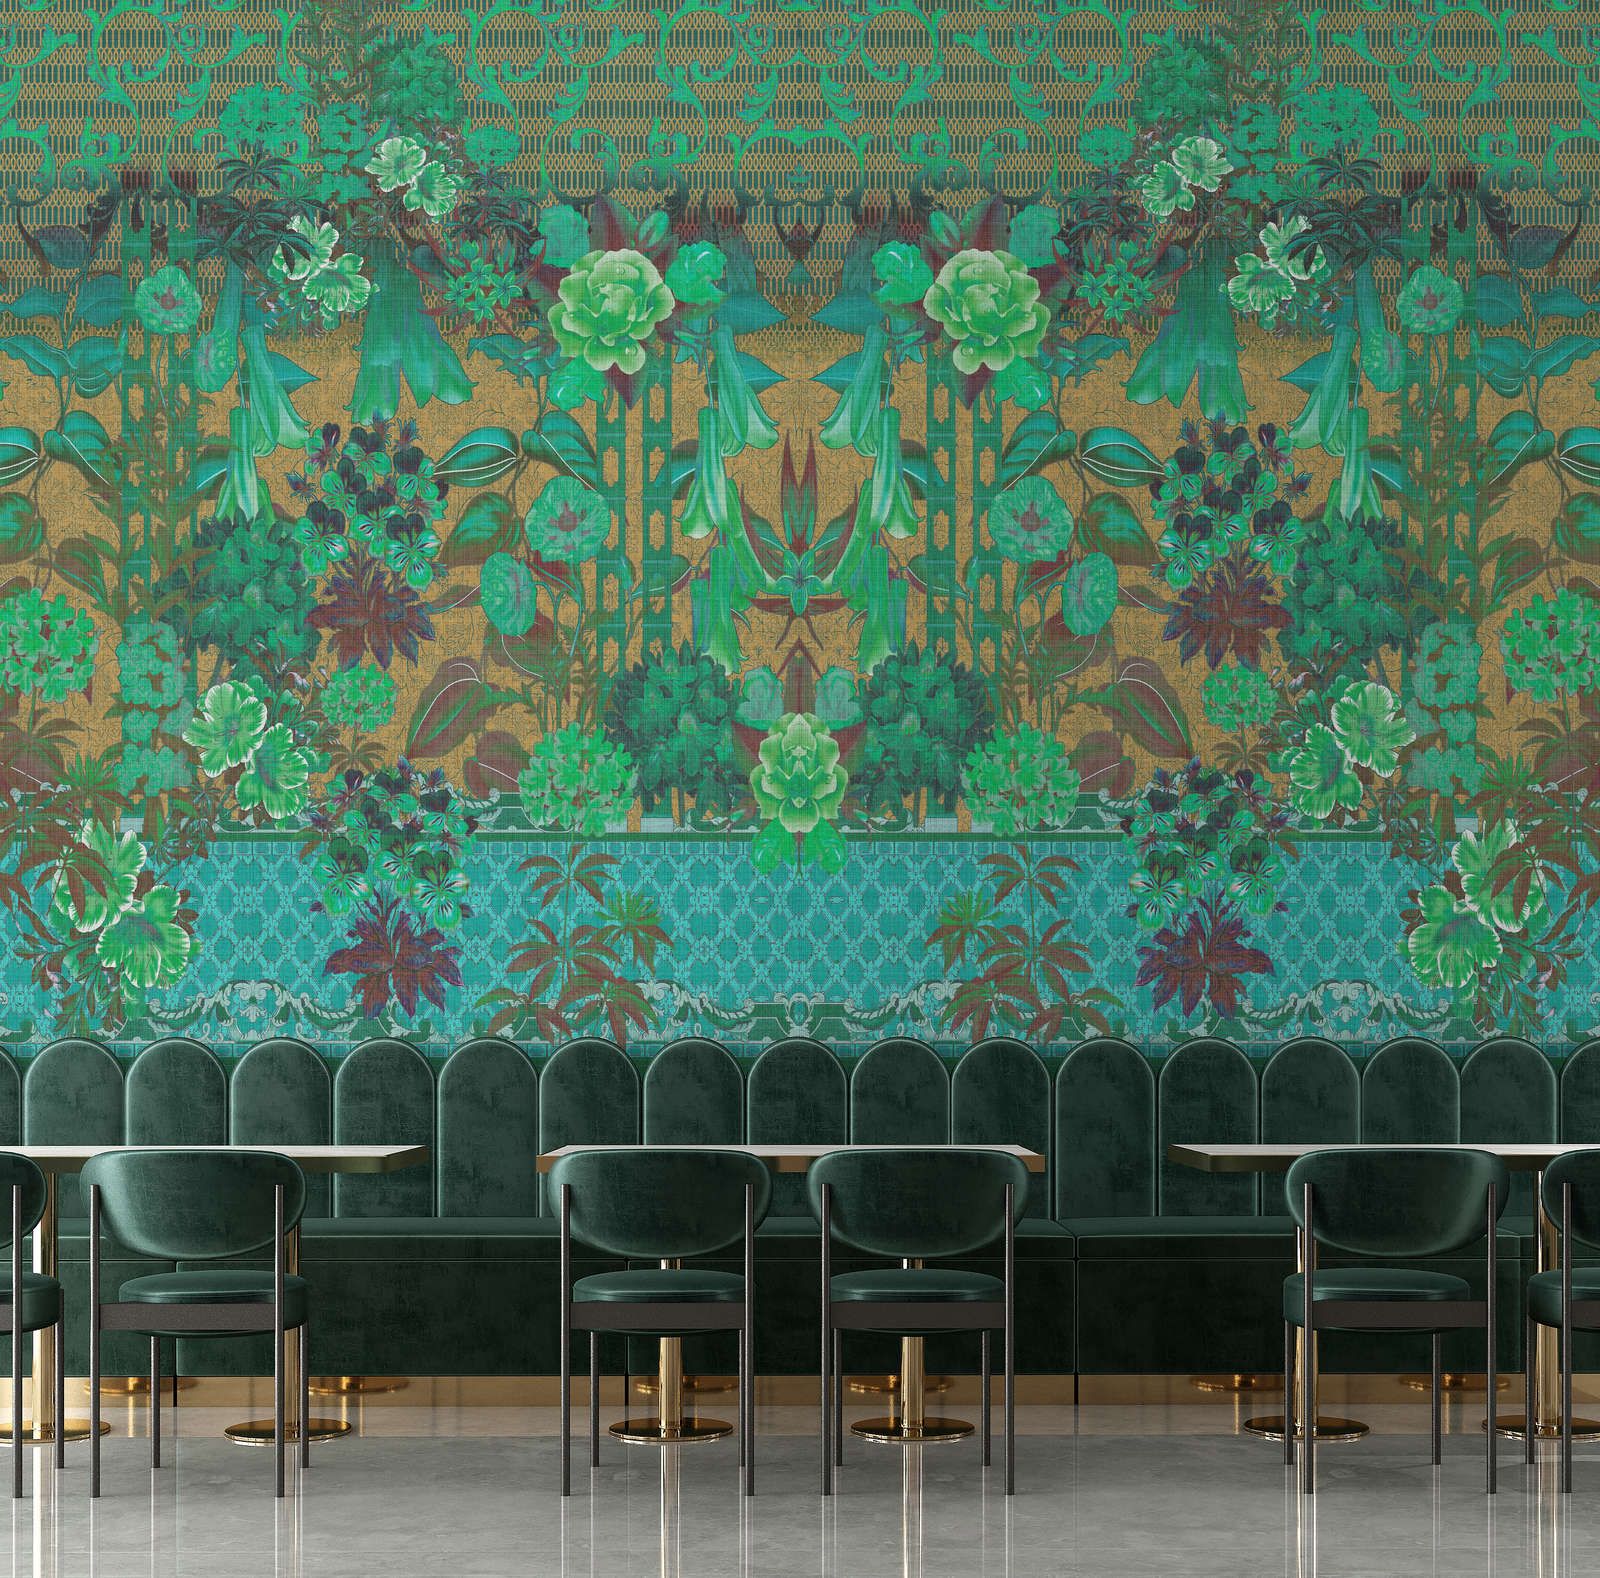             Photo wallpaper »sati 2« - Floral design & ornaments with linen structure look - Green | Lightly textured non-woven
        